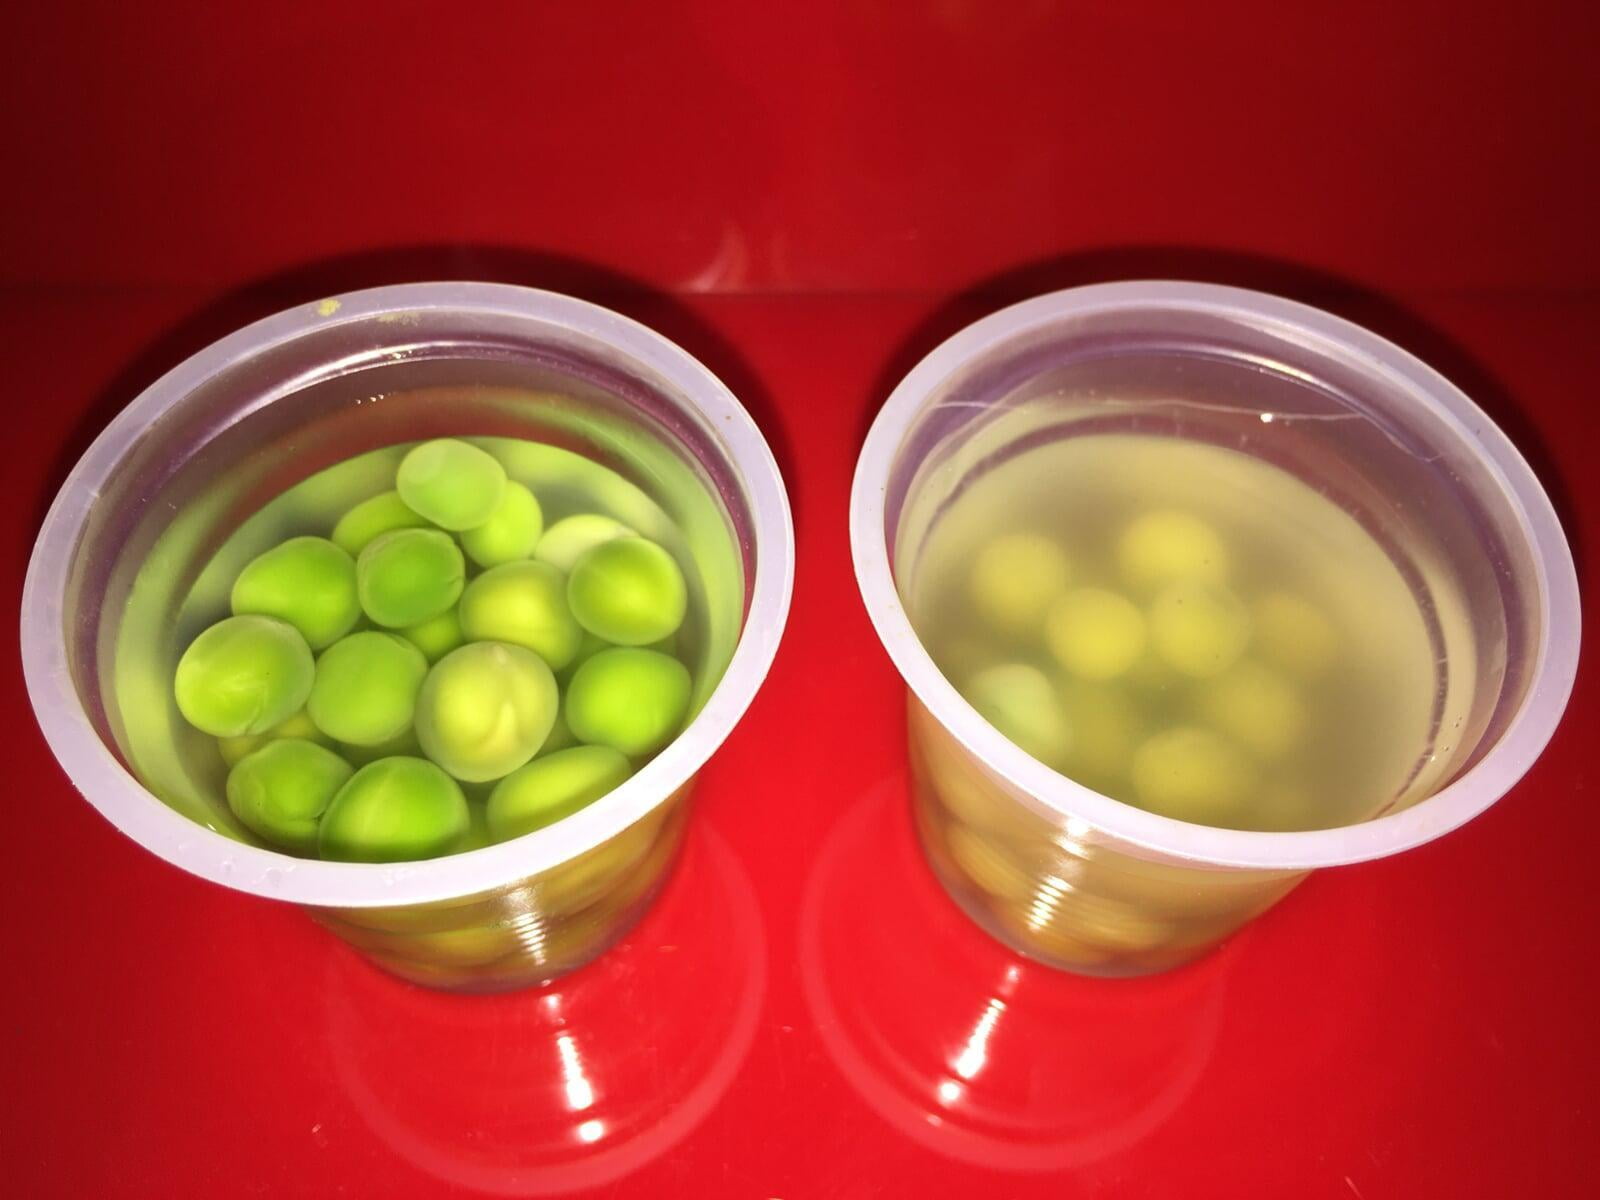 How to check for adulteration in Green Peas?